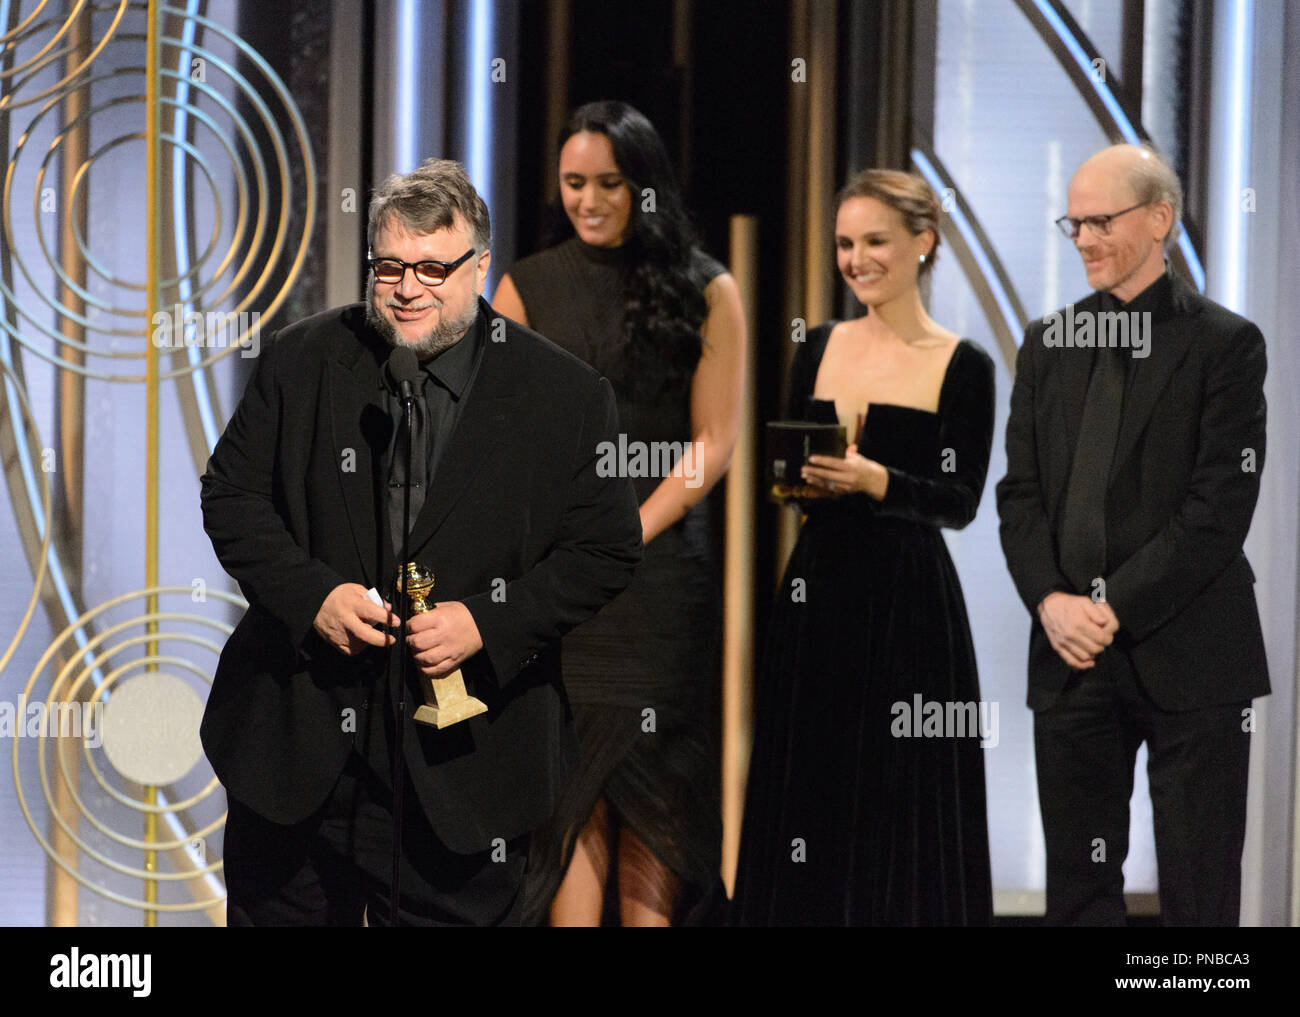 The Golden Globe is awarded to Guillermo del Toro for BEST DIRECTOR – MOTION PICTURE for 'The Shape of Water' at the 75th Annual Golden Globe Awards at the Beverly Hilton in Beverly Hills, CA on Sunday, January 7, 2018.  File Reference # 33508 570JRC  For Editorial Use Only -  All Rights Reserved Stock Photo